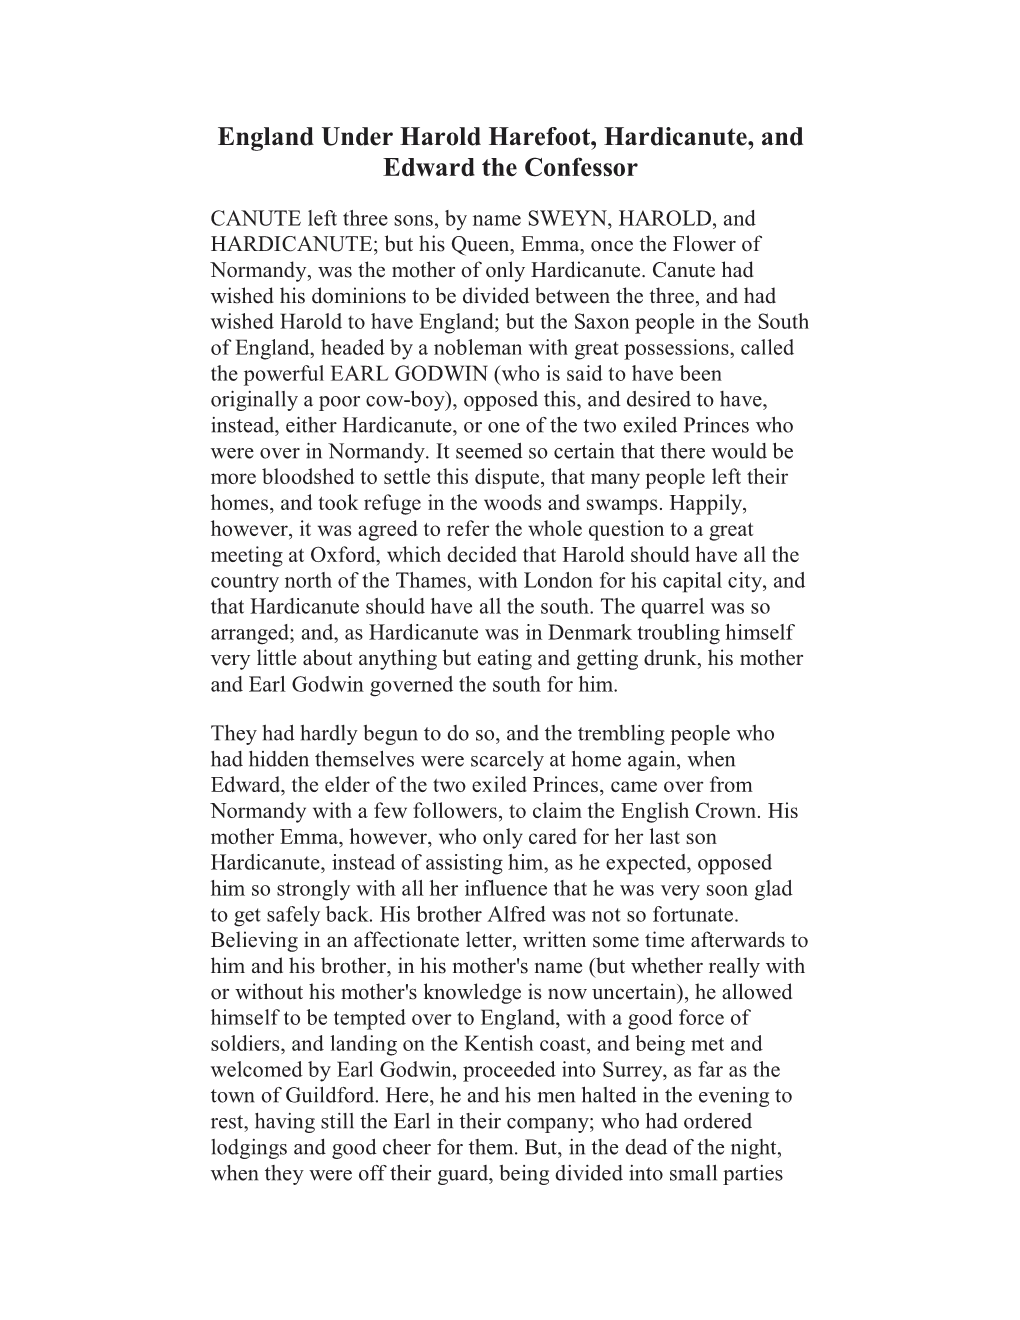 England Under Harold Harefoot, Hardicanute, and Edward the Confessor